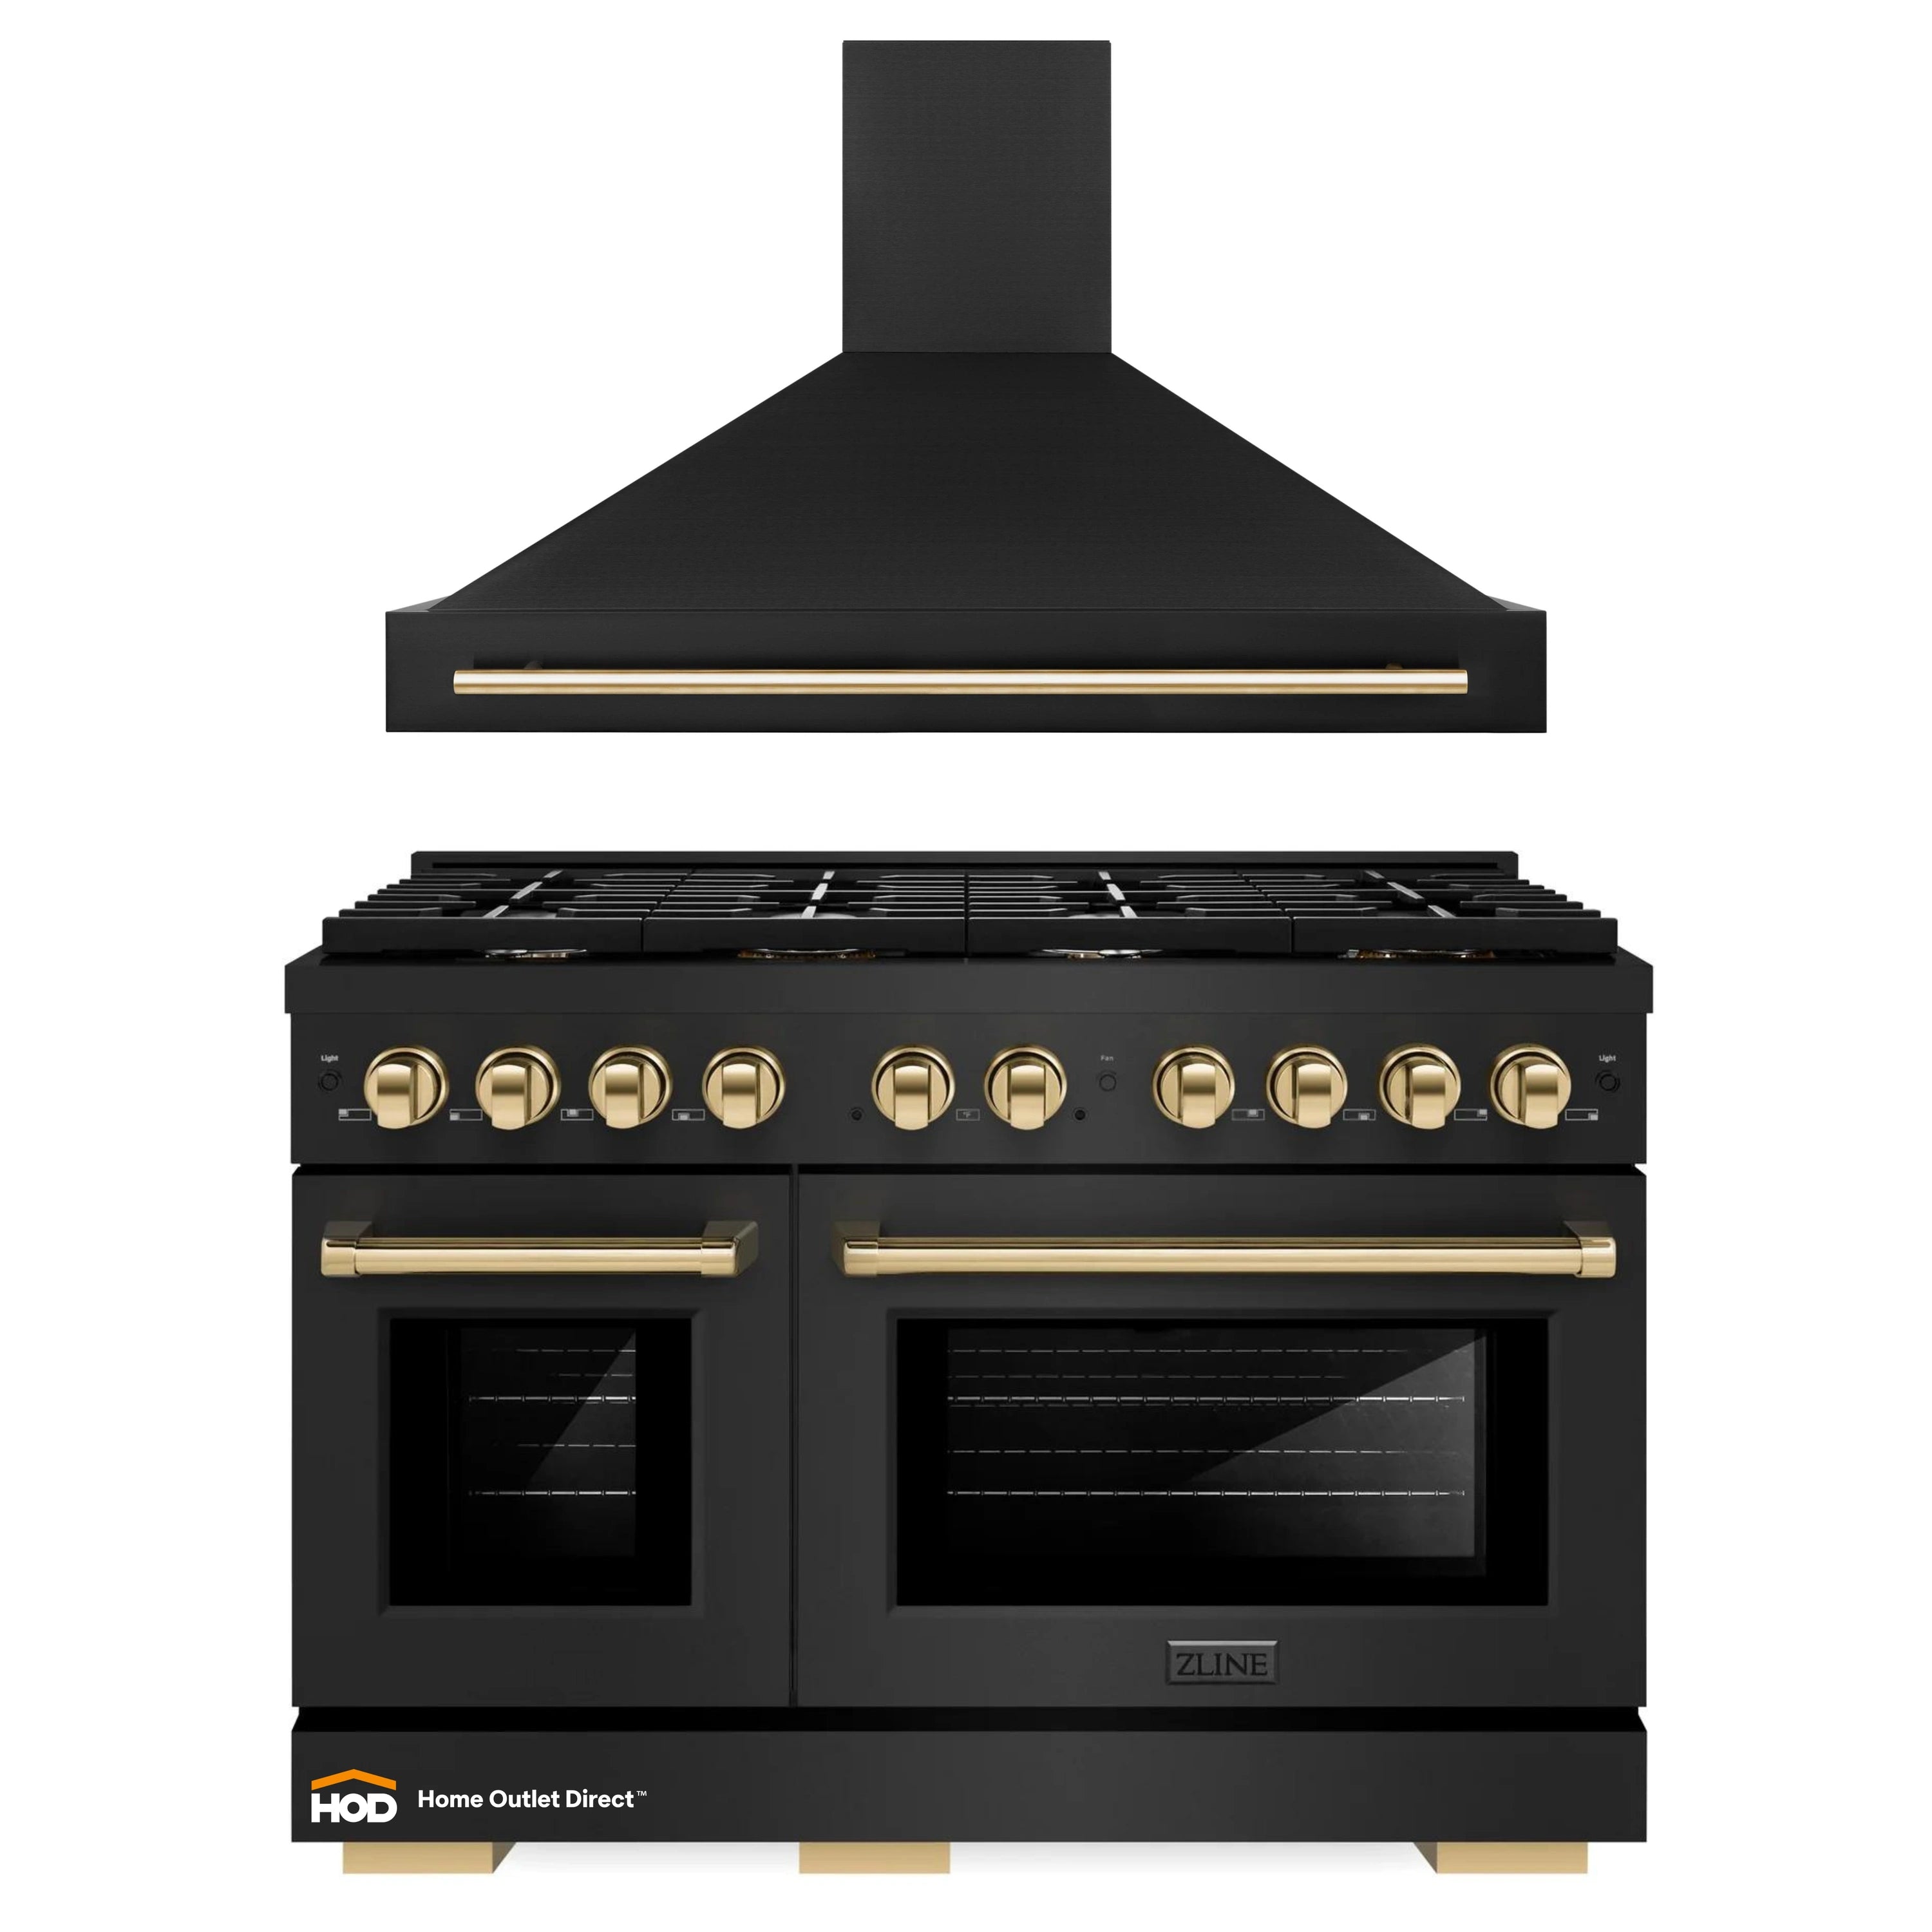 ZLINE Autograph Edition 2-Piece Appliance Package - 48-Inch Gas Range & Wall Mounted Range Hood in Black Stainless Steel with Gold Trim (2AKPR-RGBRH48-G)